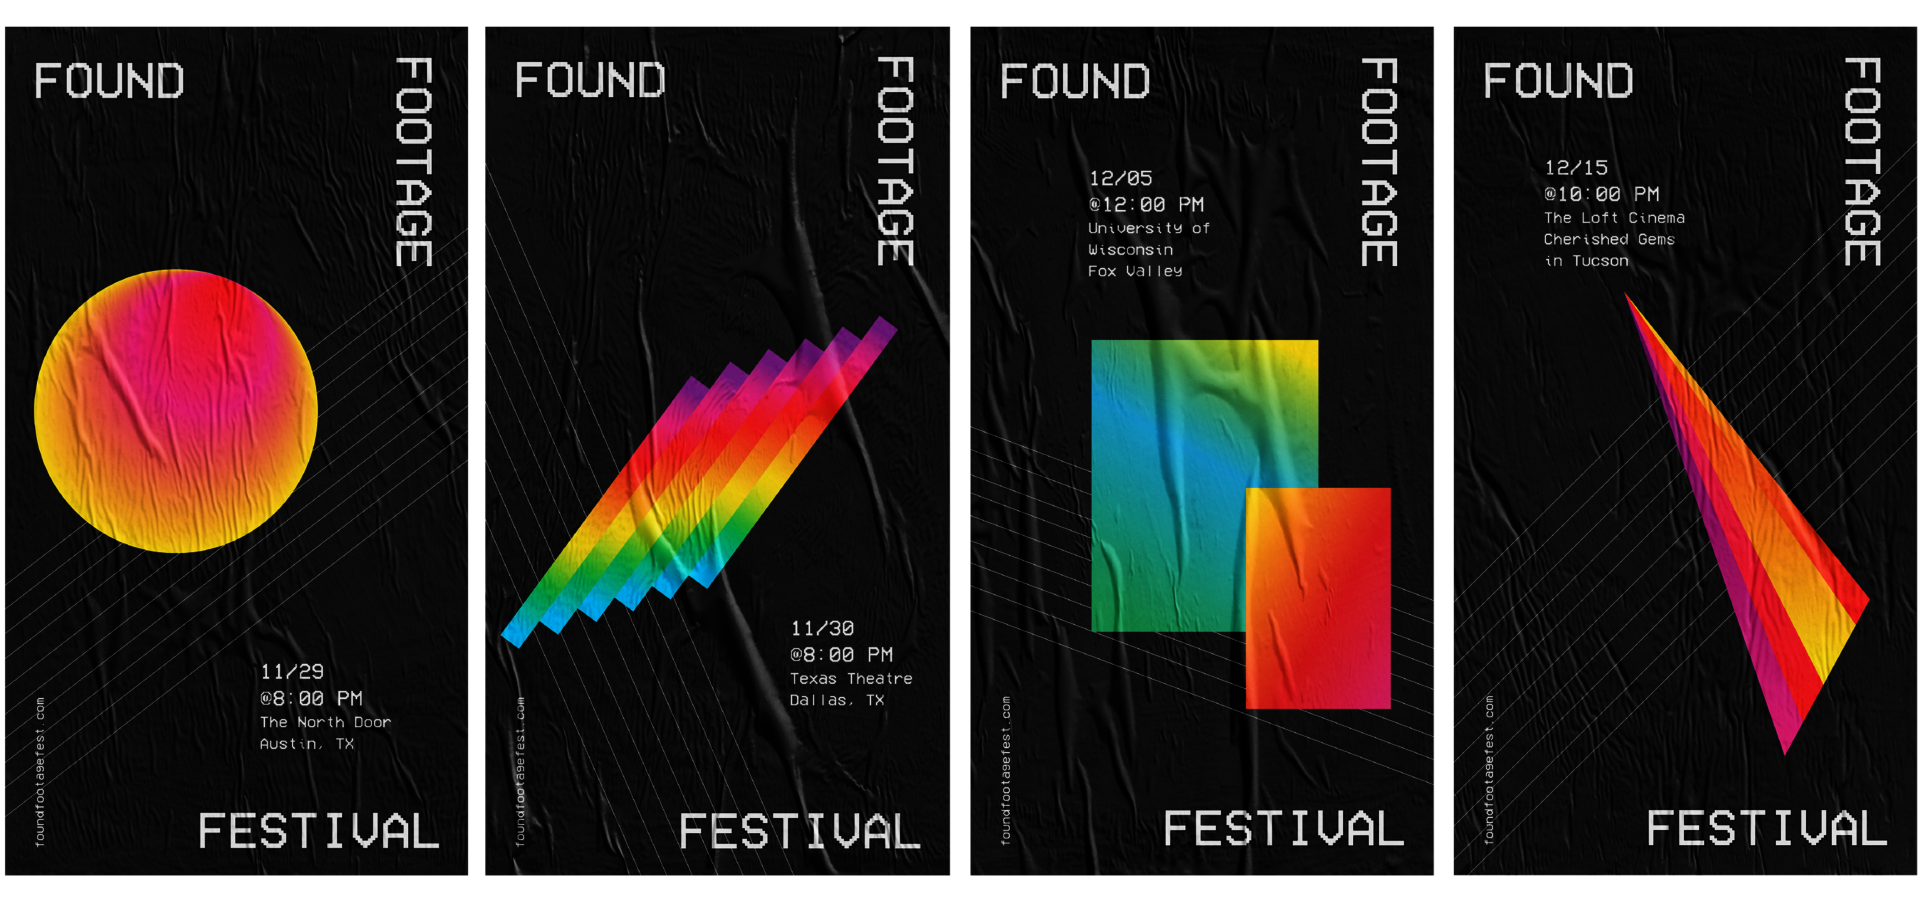 Four poster designs for the Found Footage Festival redesign